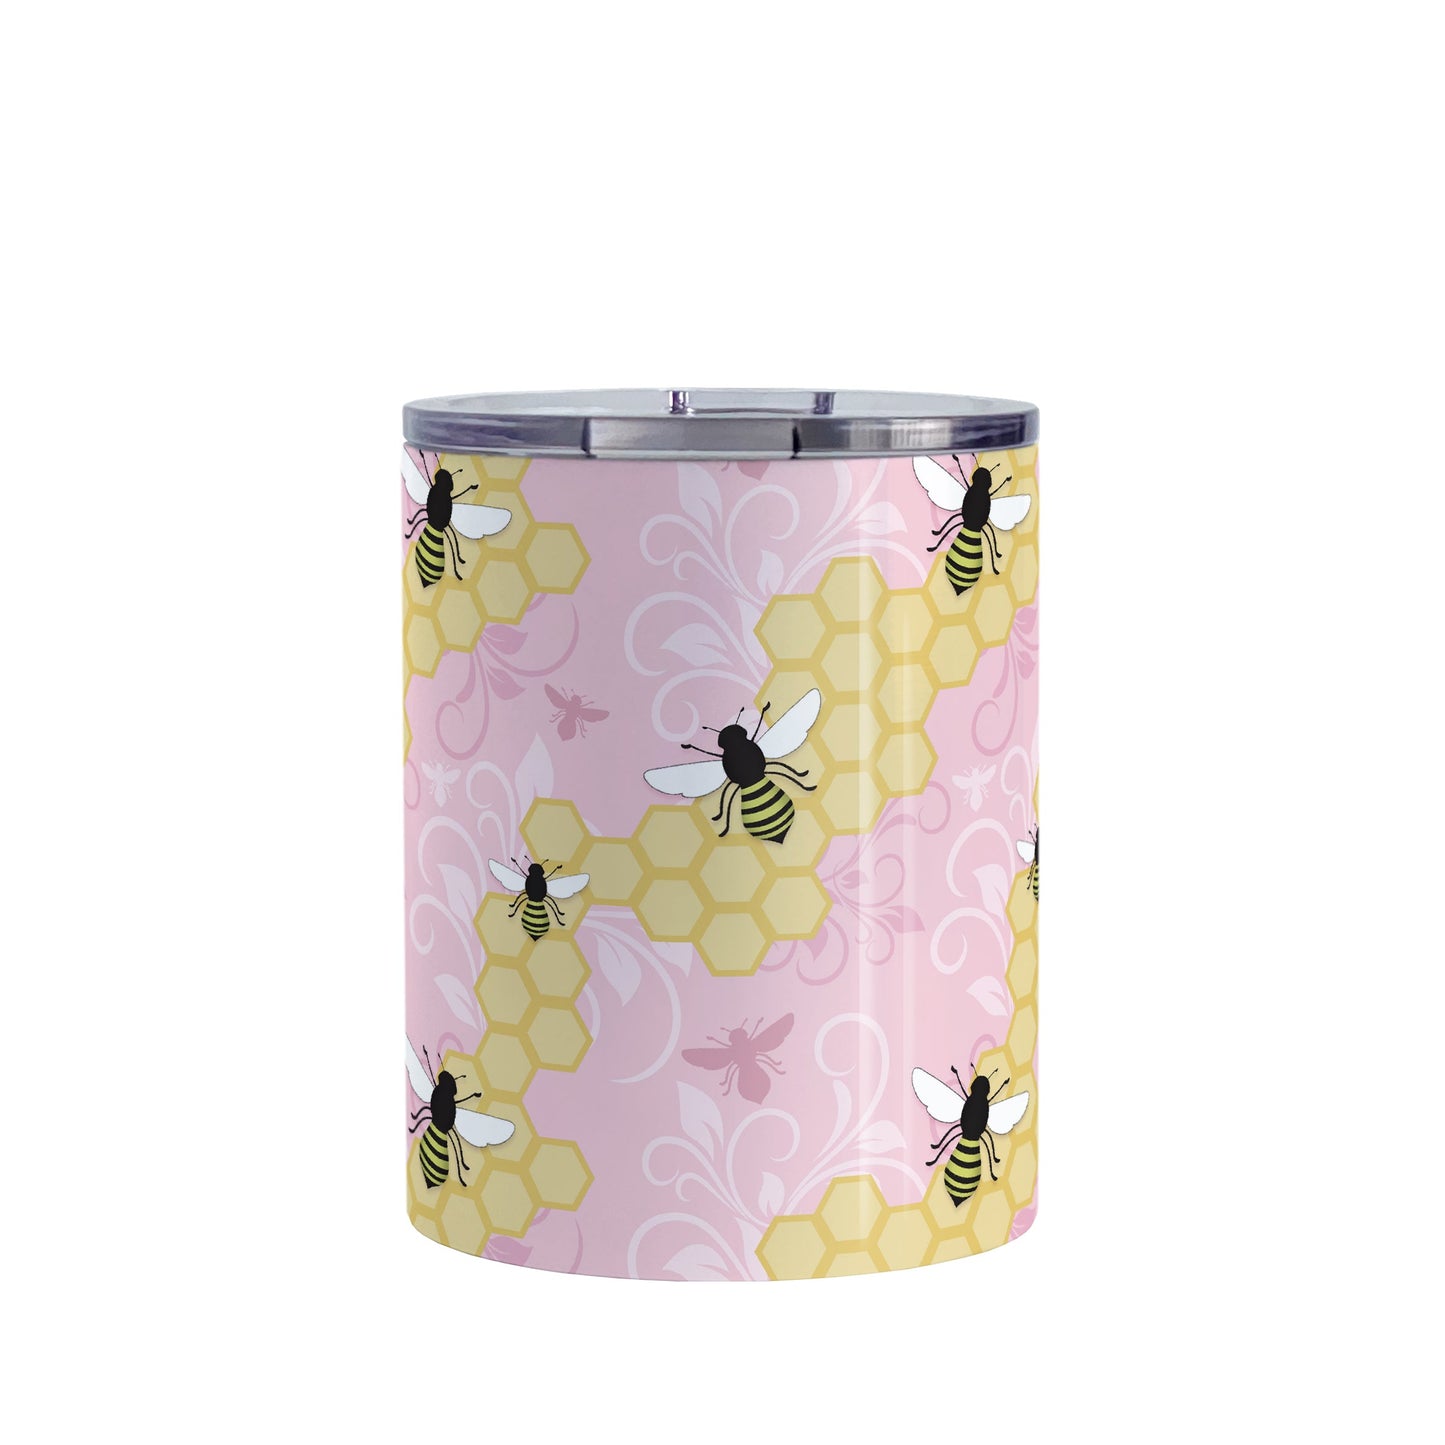 Pink Honeycomb Bee Tumbler Cup (10oz, stainless steel insulated) at Amy's Coffee Mugs. A tumbler cup designed with a pattern of black and yellow bees on honeycomb lines over a pink flourish background that wraps around the cup.